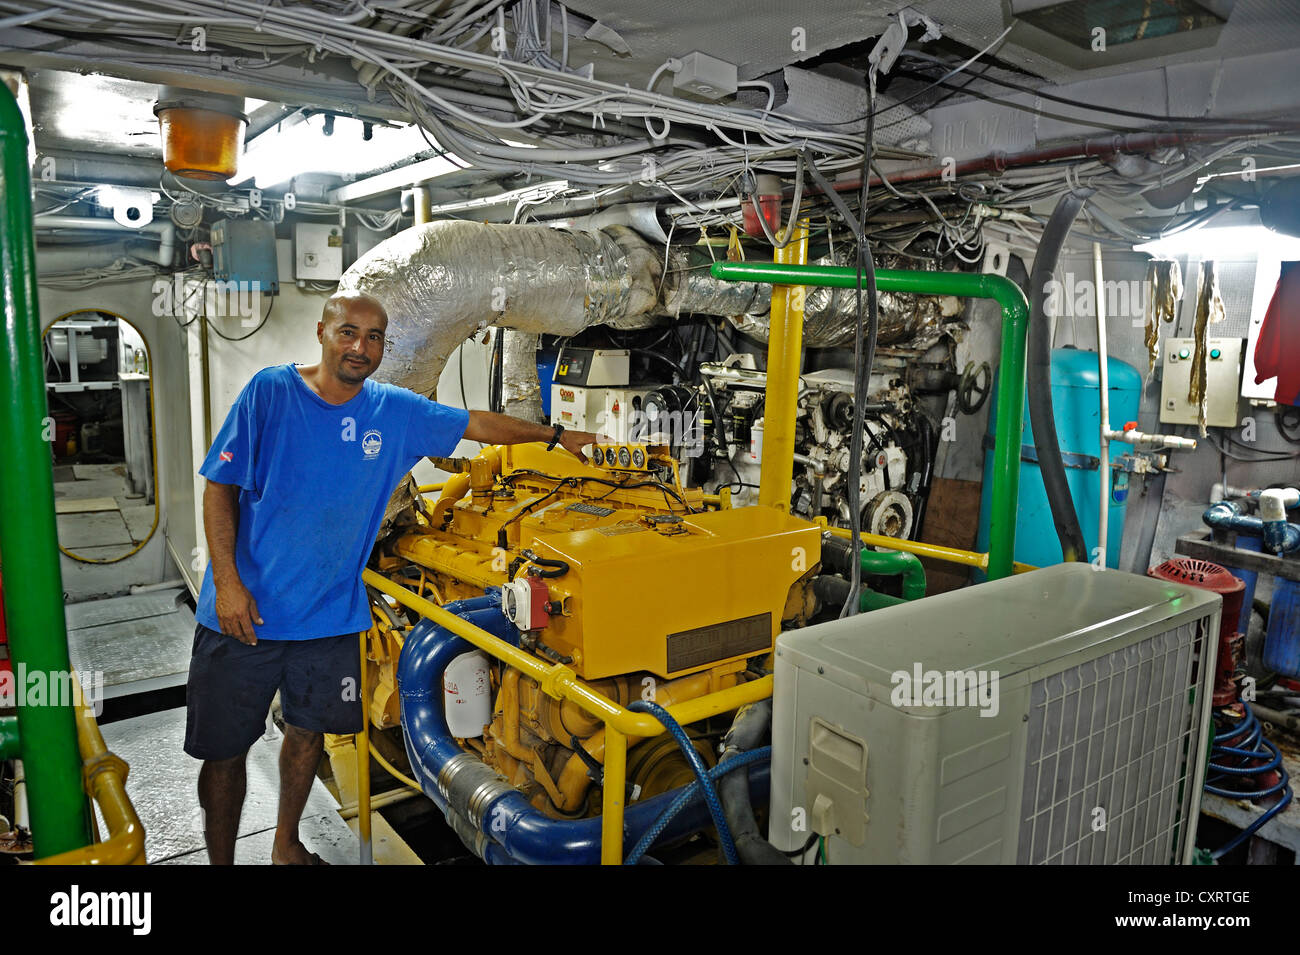 Machinist working in the engine room of a ship, Okeanoss Aggressor, Costa Rica, Central America Stock Photo